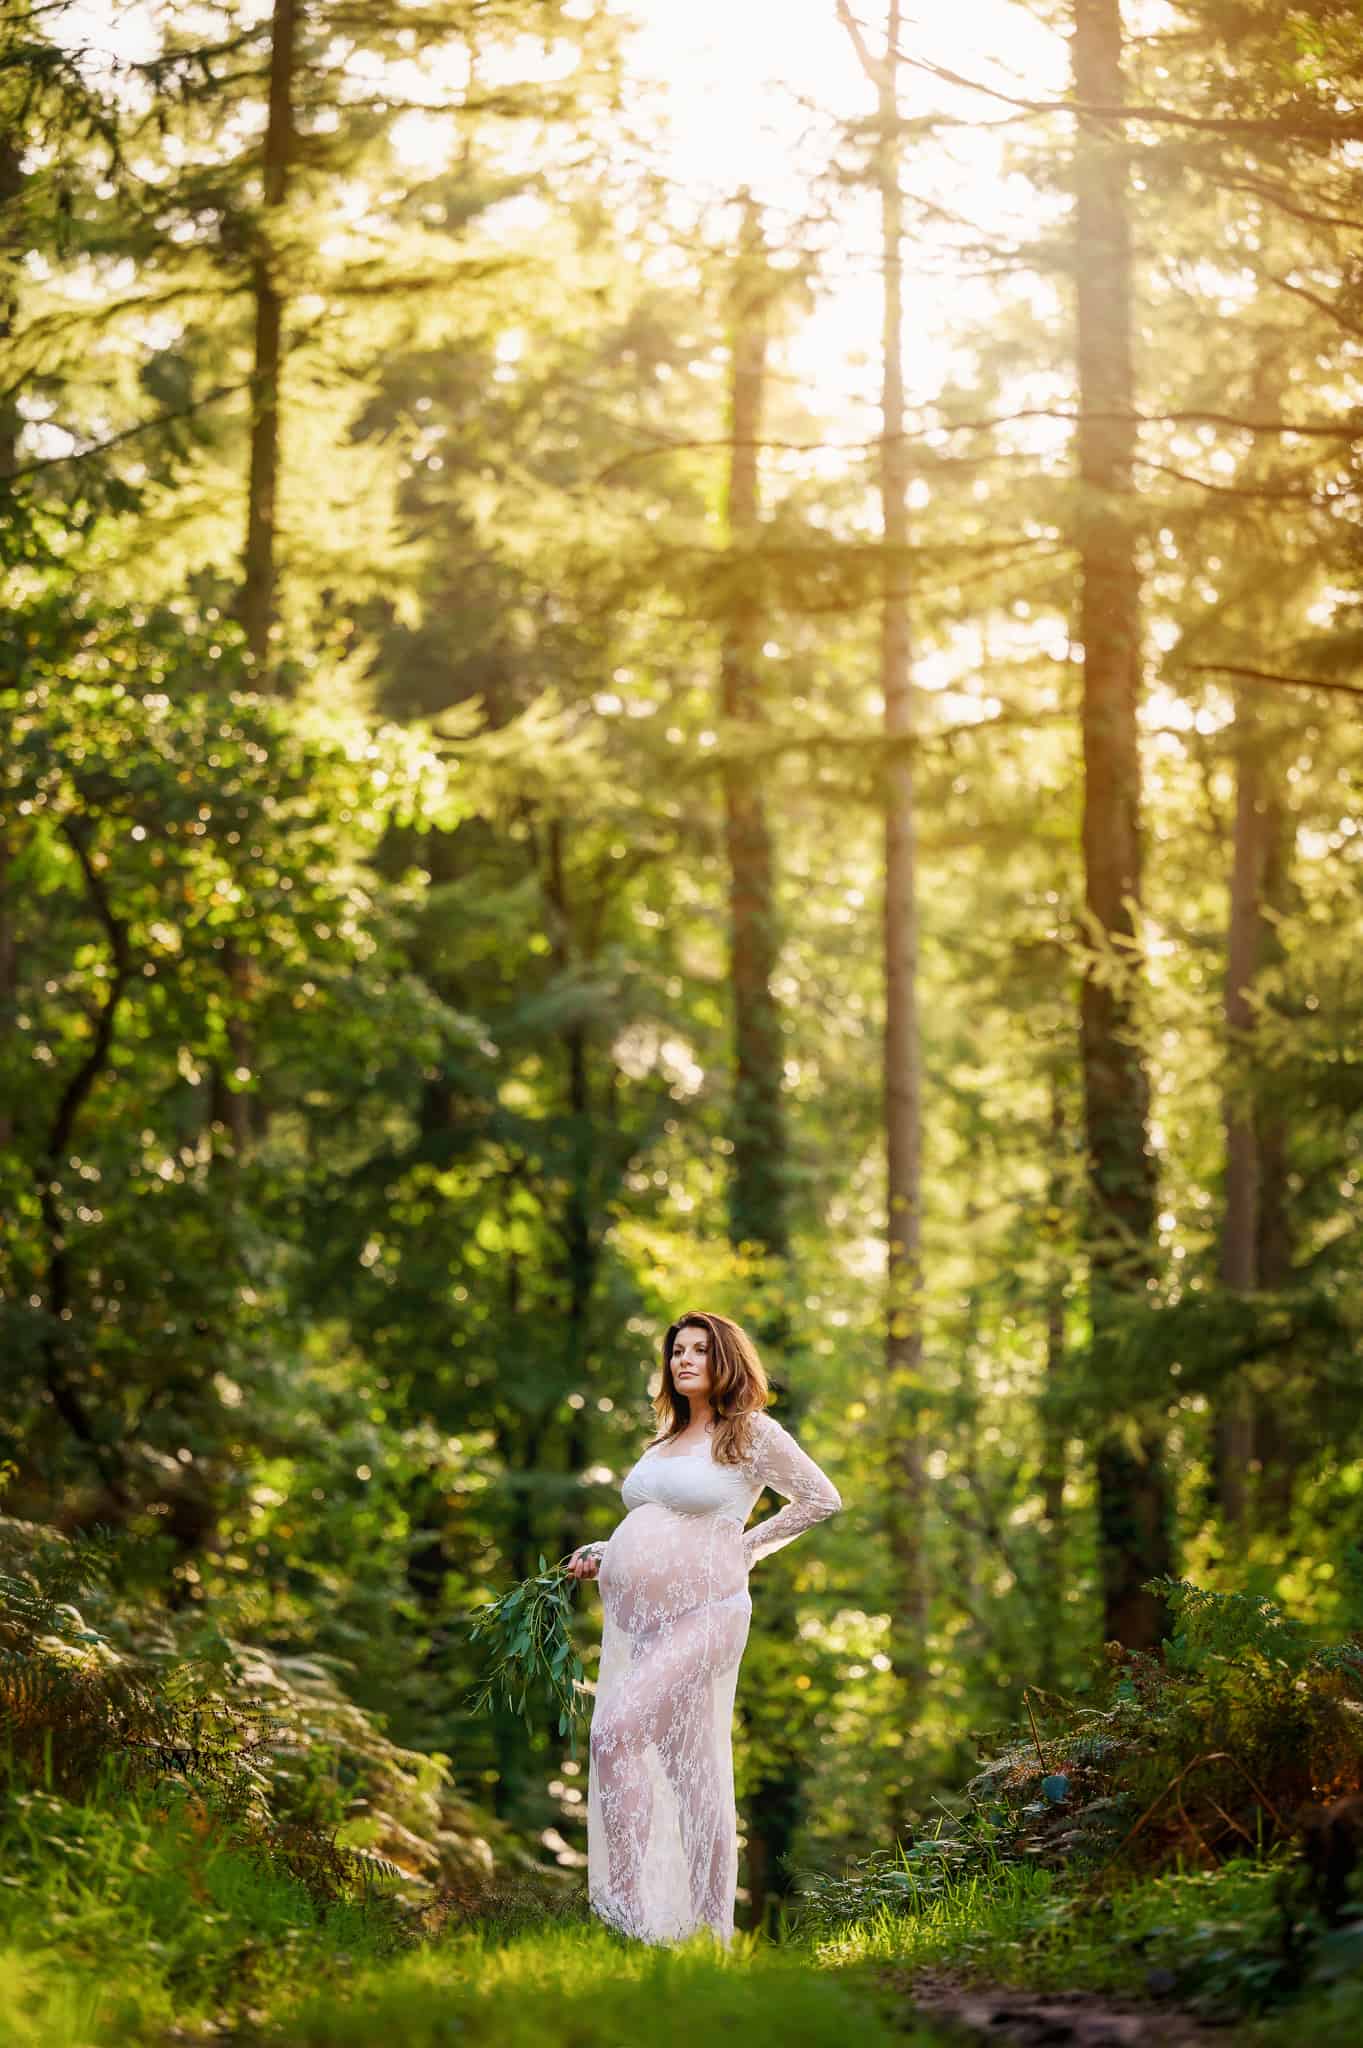 Pregnant lady weraing a white dress in a pine forest with light shining through the trees